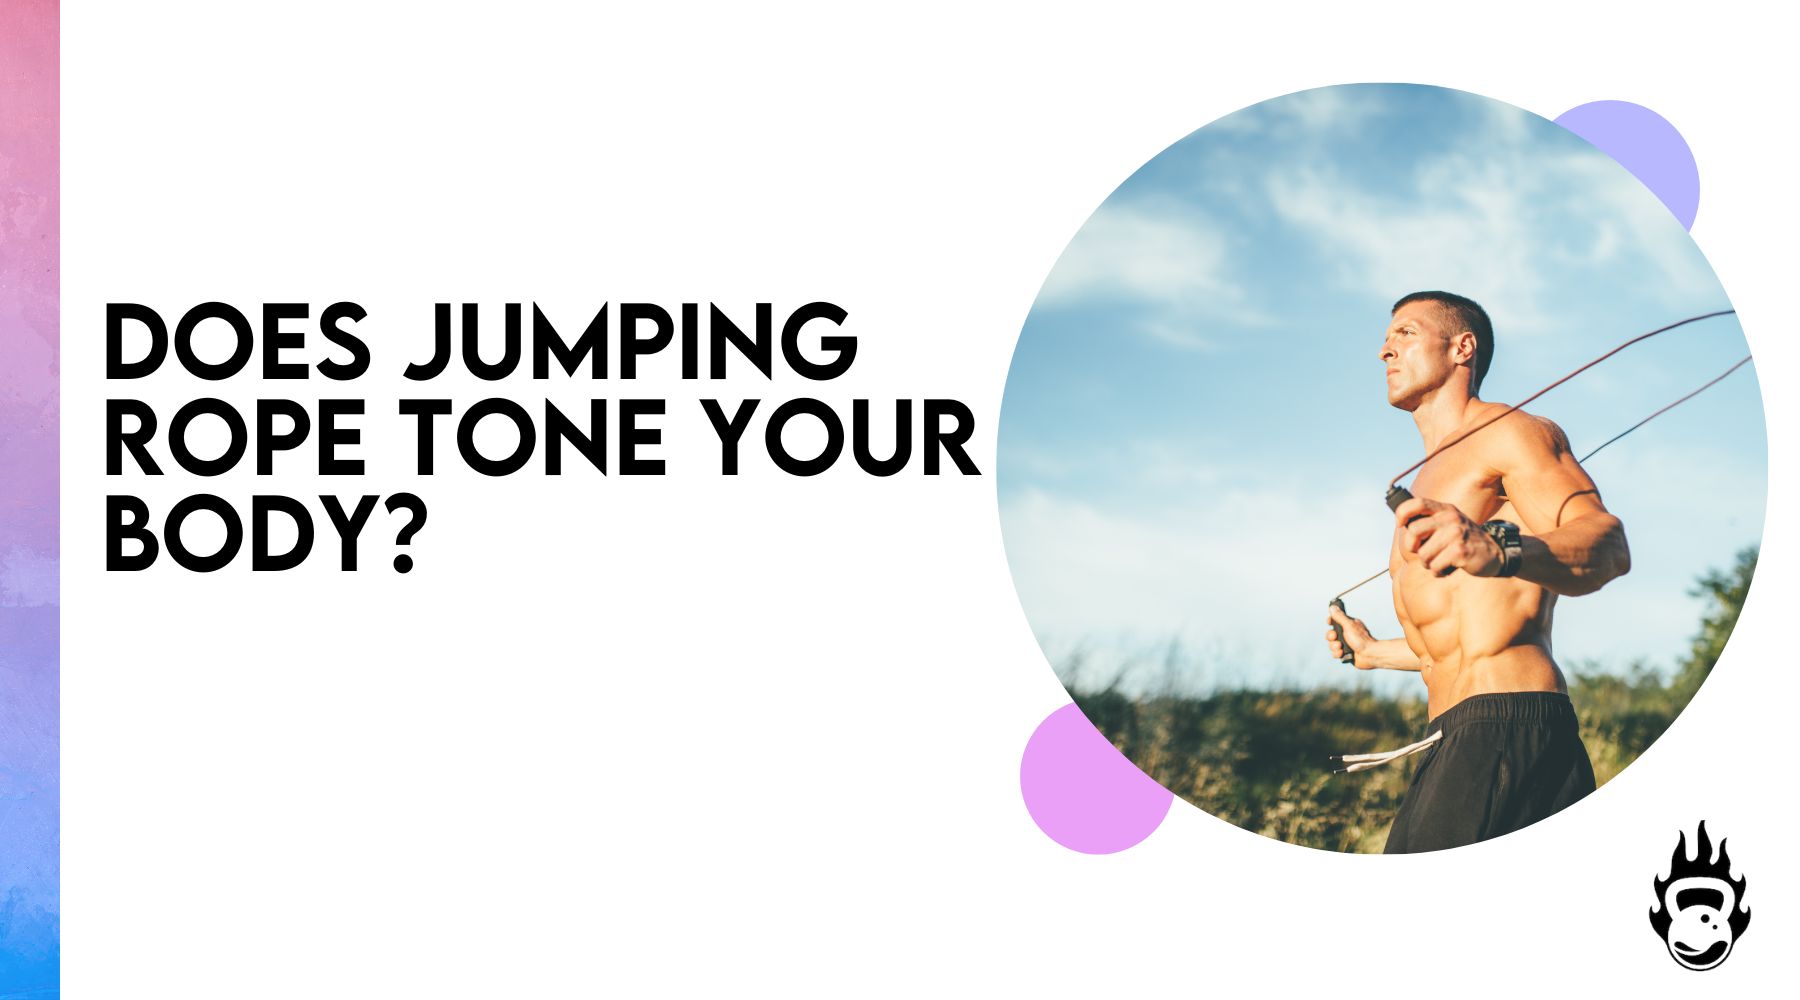 Does jumping rope tone your body